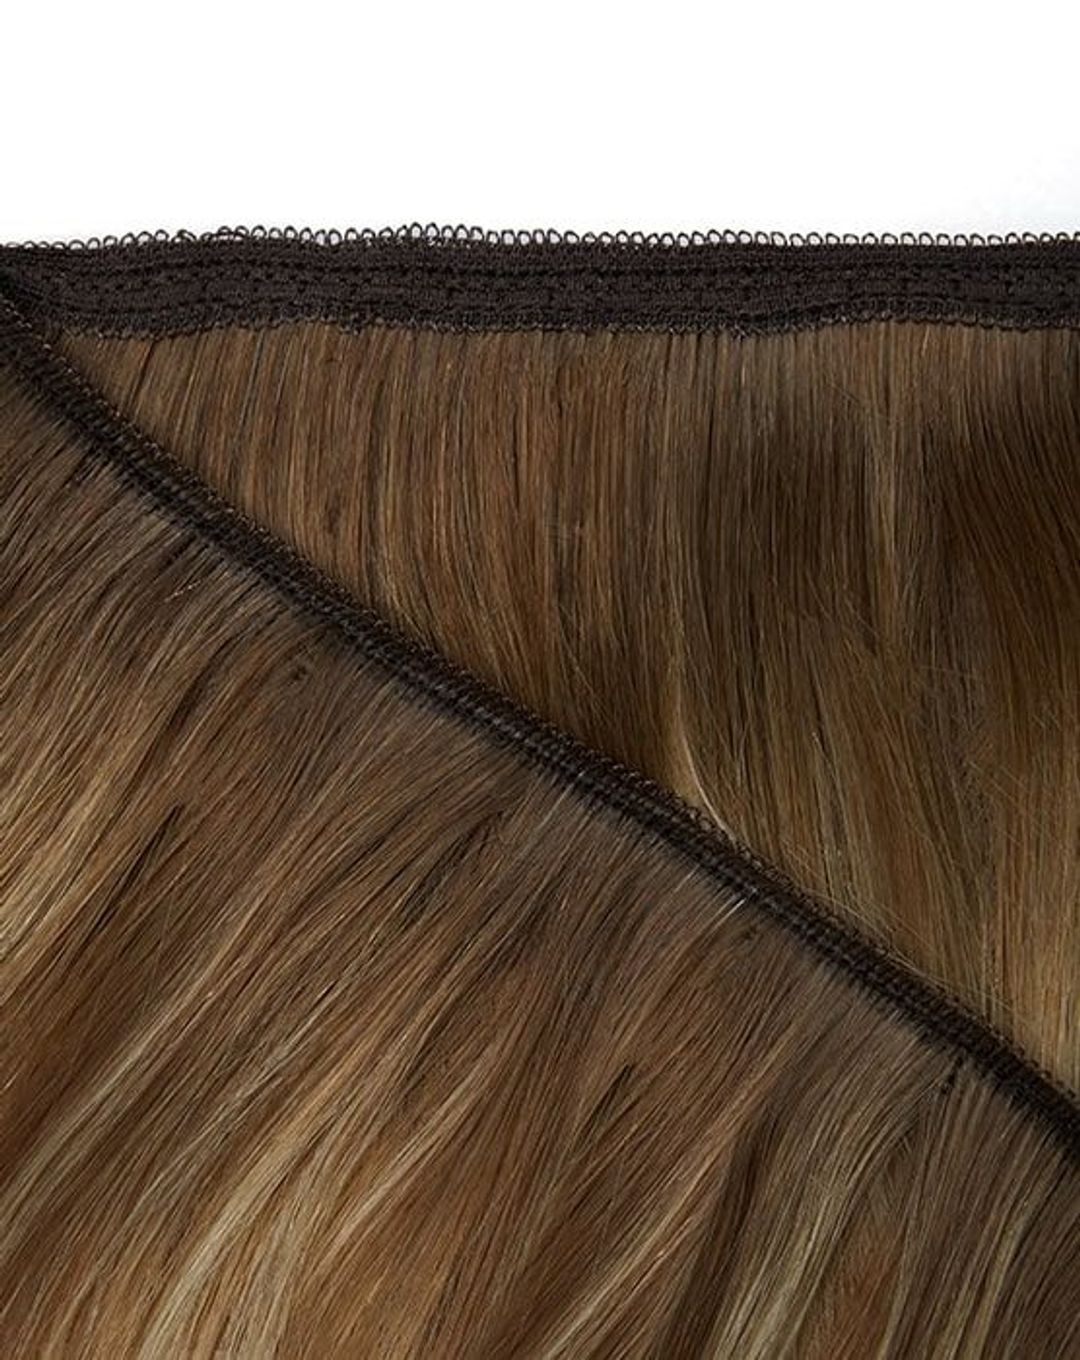 Beauty Works Gold Double Weft Extensions - Caramelized,24"